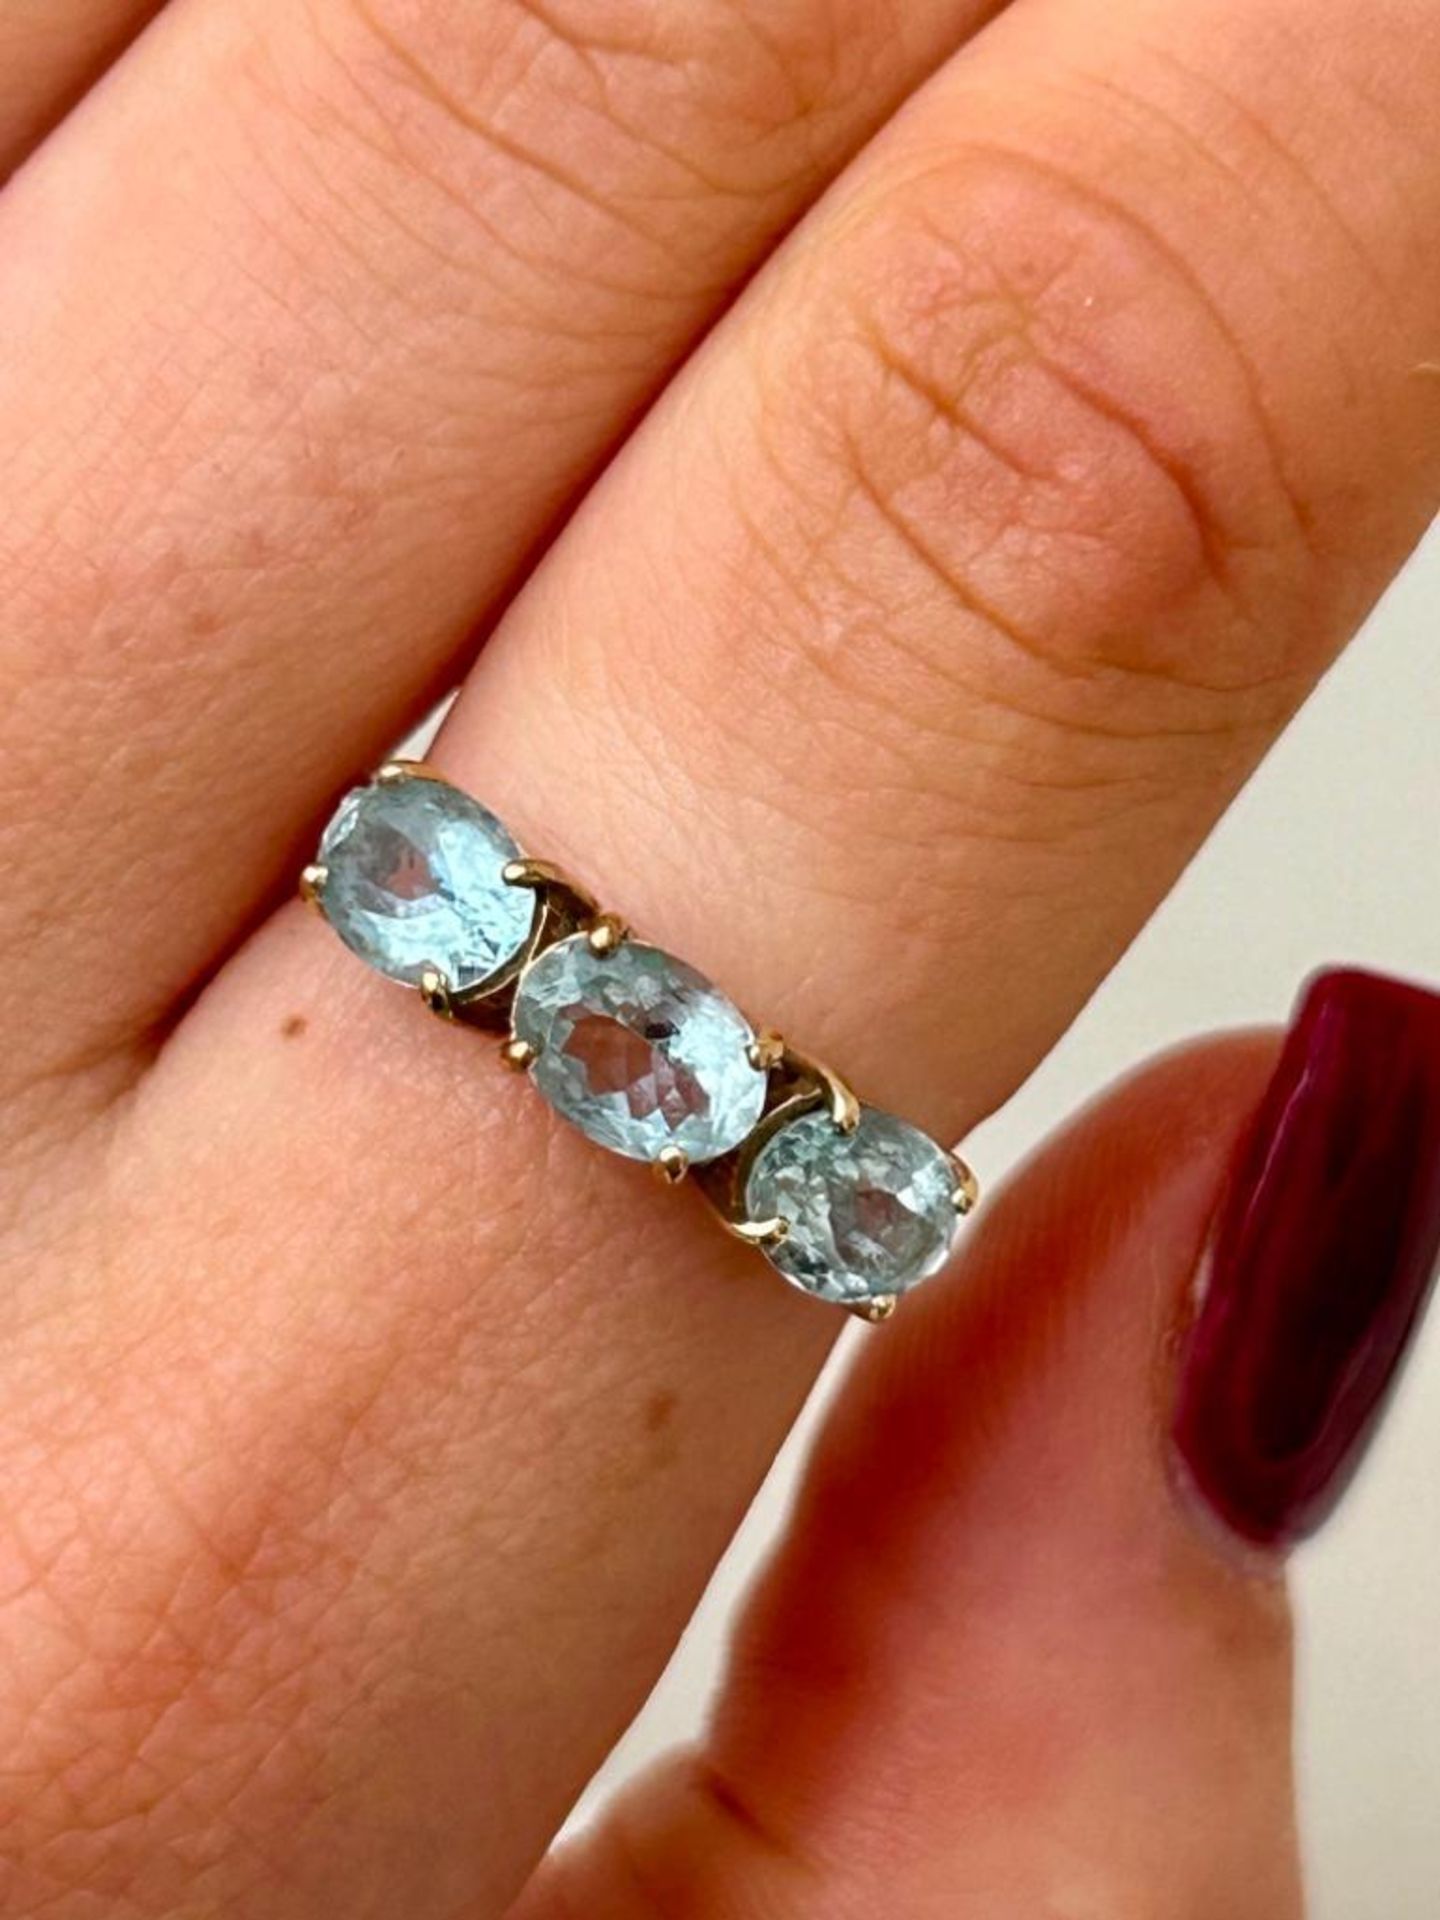 Sweet Aquamarine 3 Stone Ring with Diamond Shoulders in Gold - Image 2 of 7